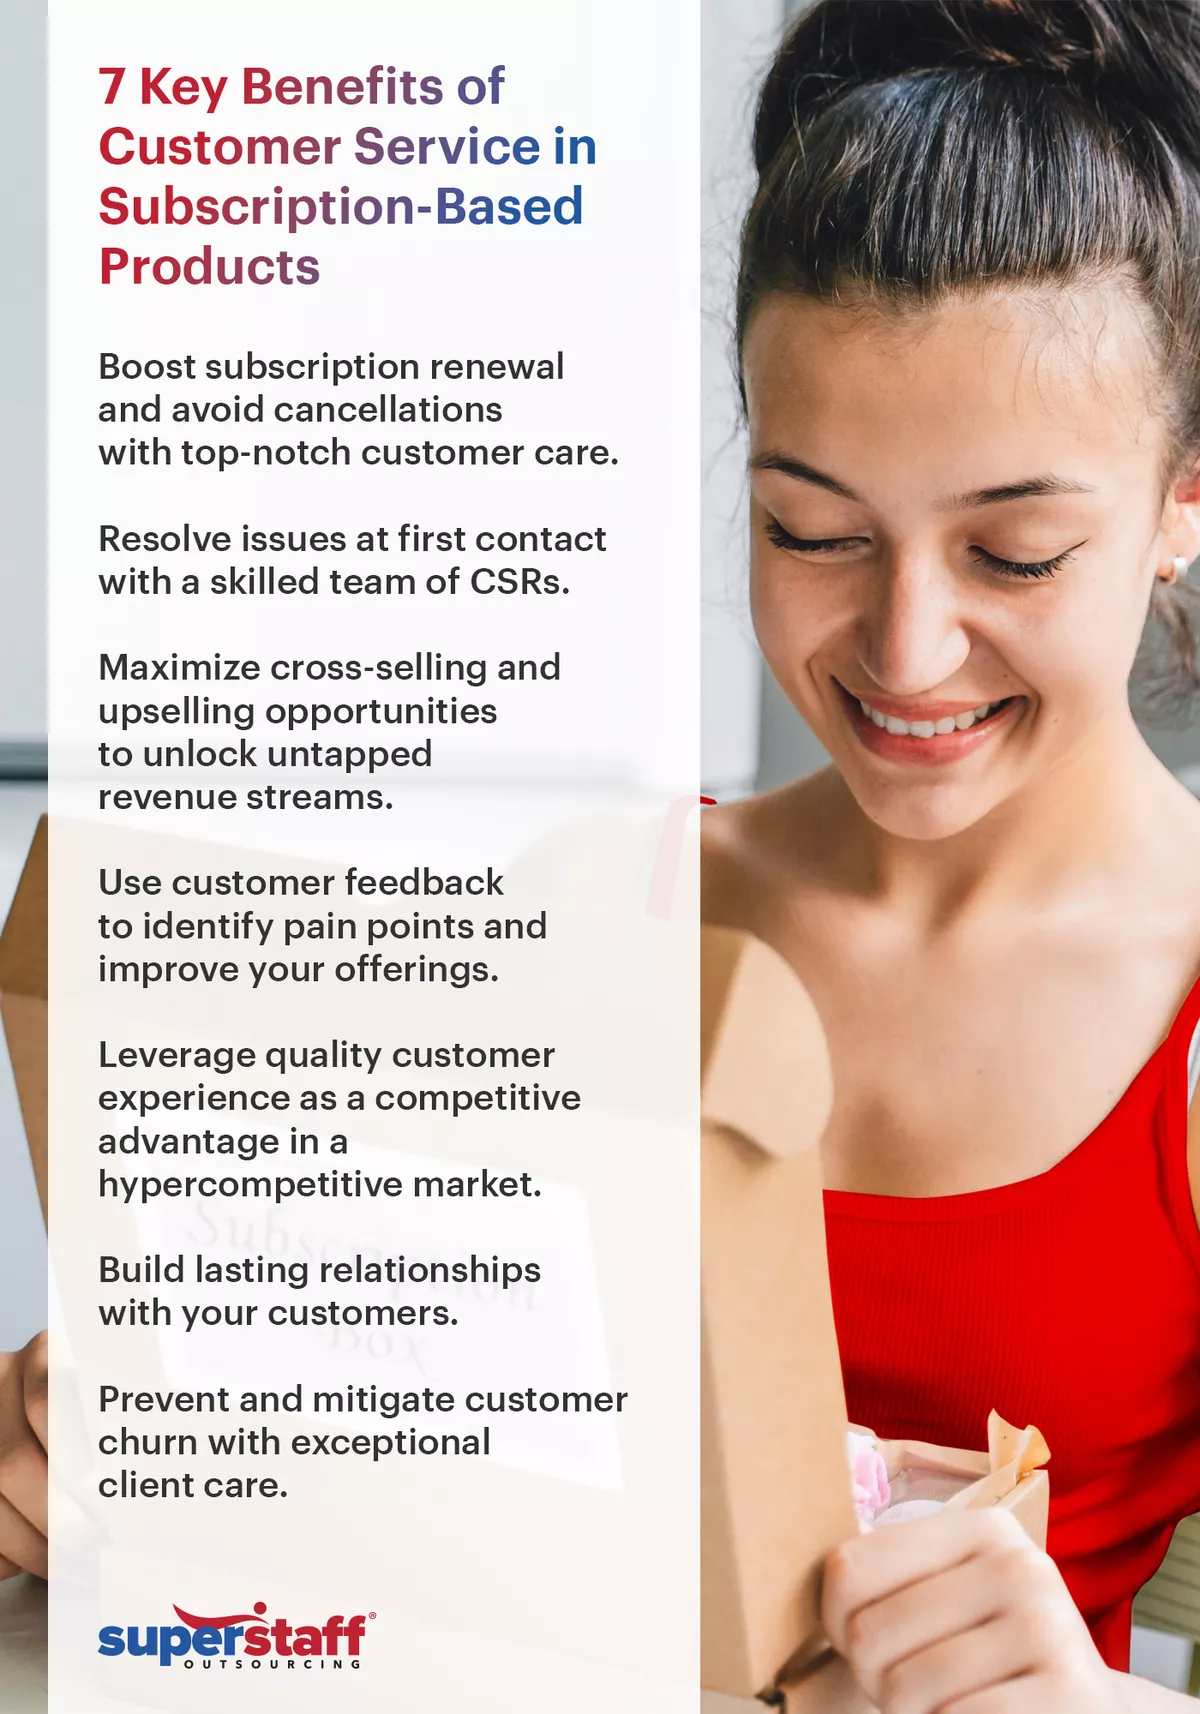 An infographic the 7 key benefits of customer service in achieving customer loyalty for subscription-based products and services.